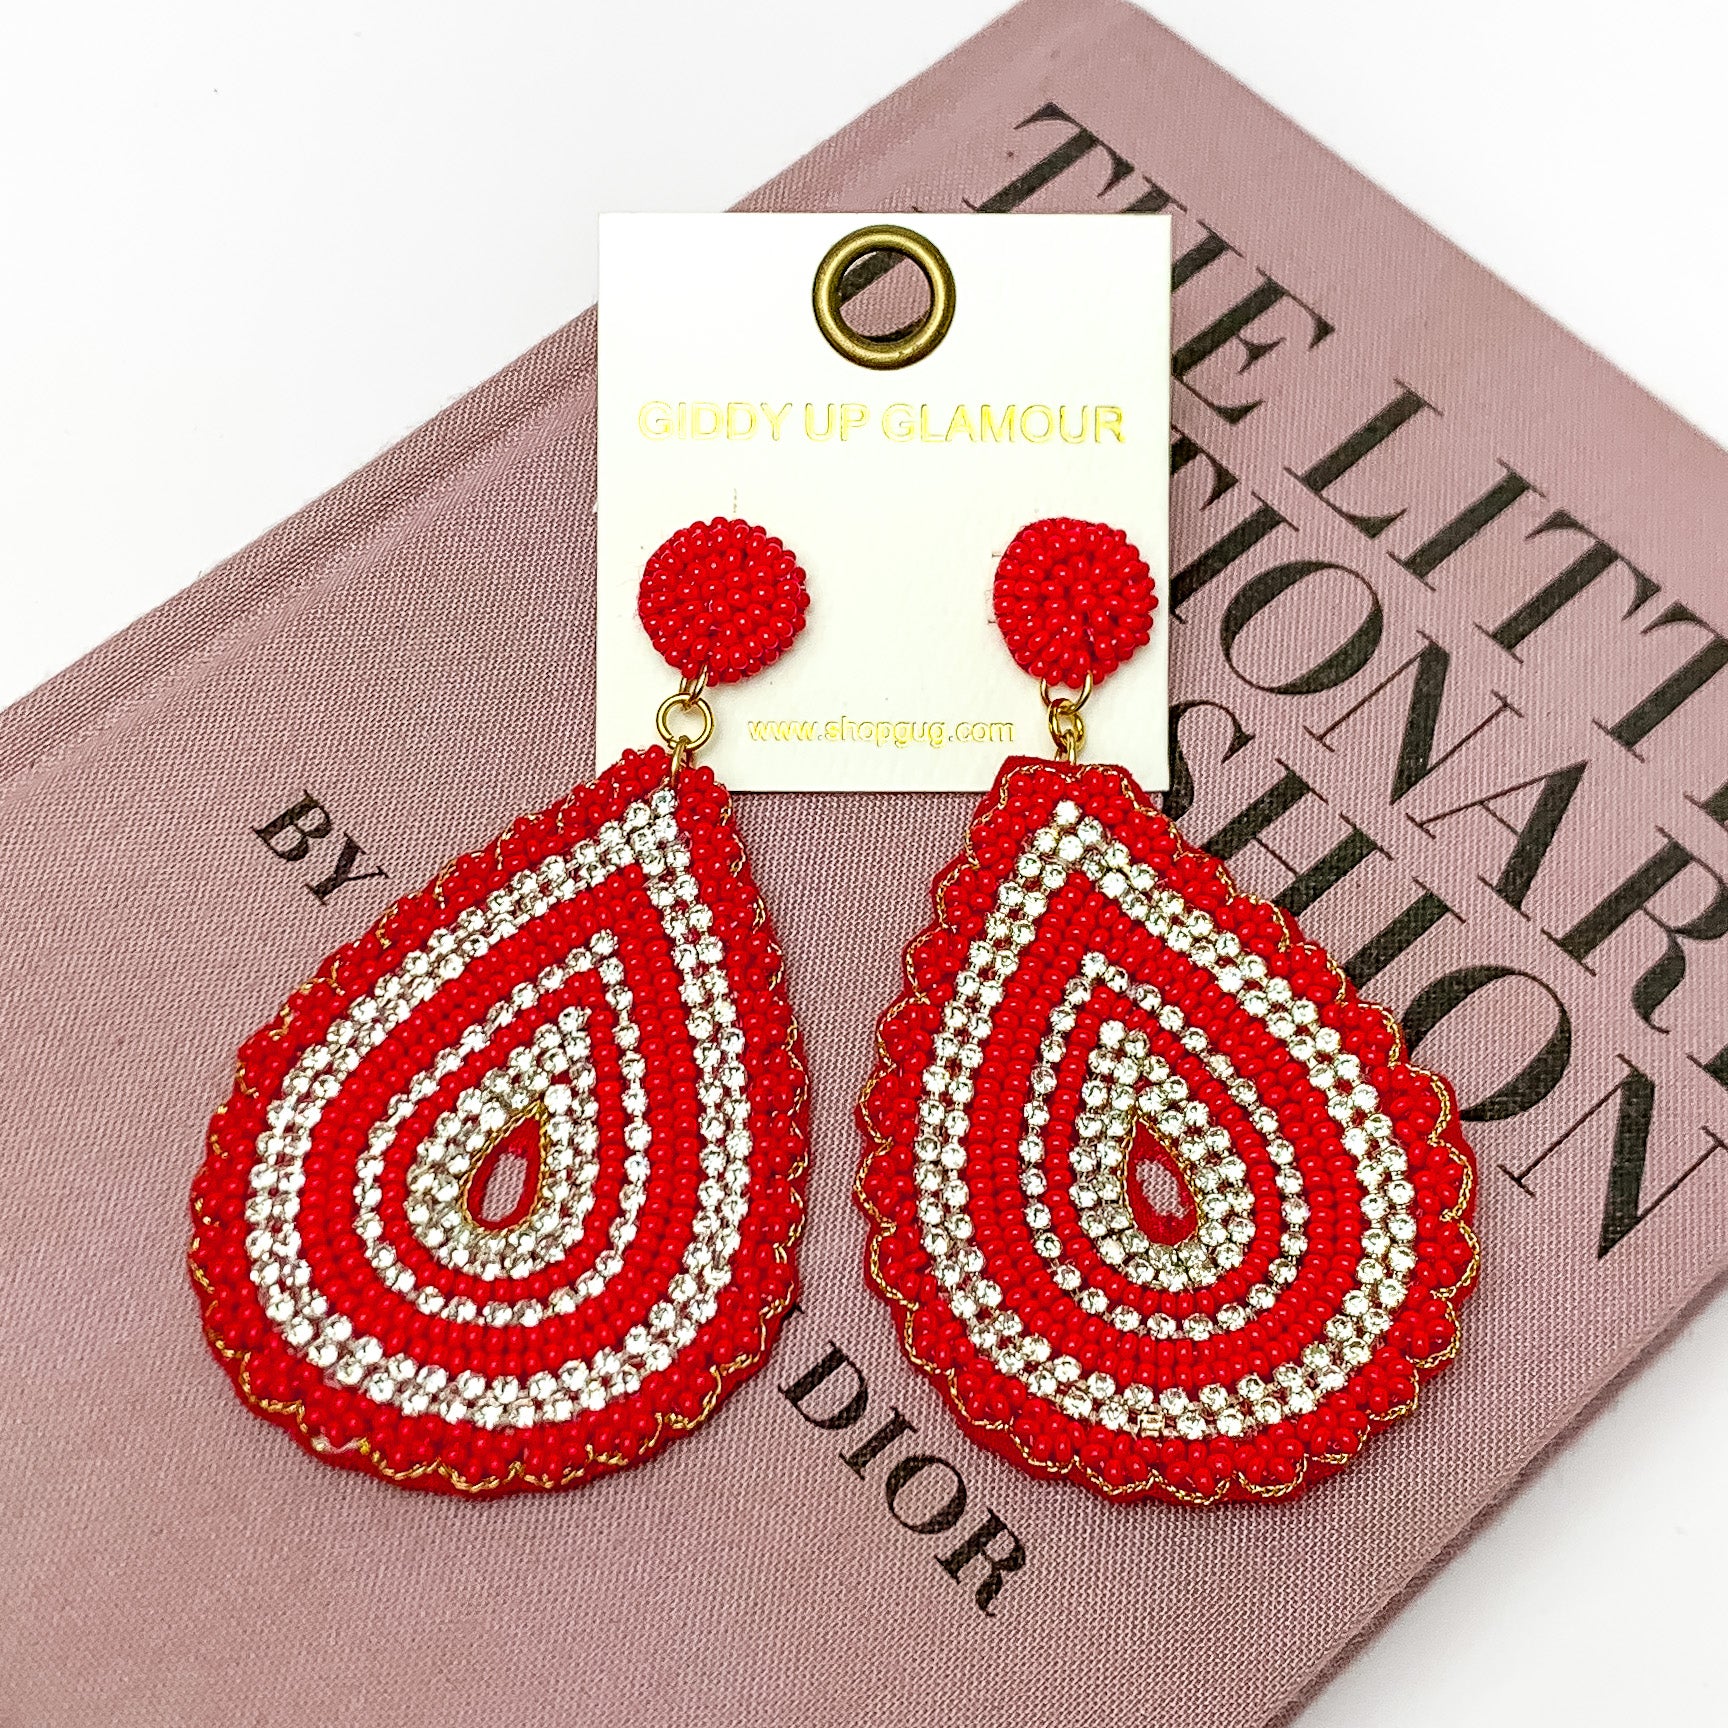 Sound Wave Beaded Drop Earrings with Clear Crystals in Red. Pictured on a white background with a book behind the earrings